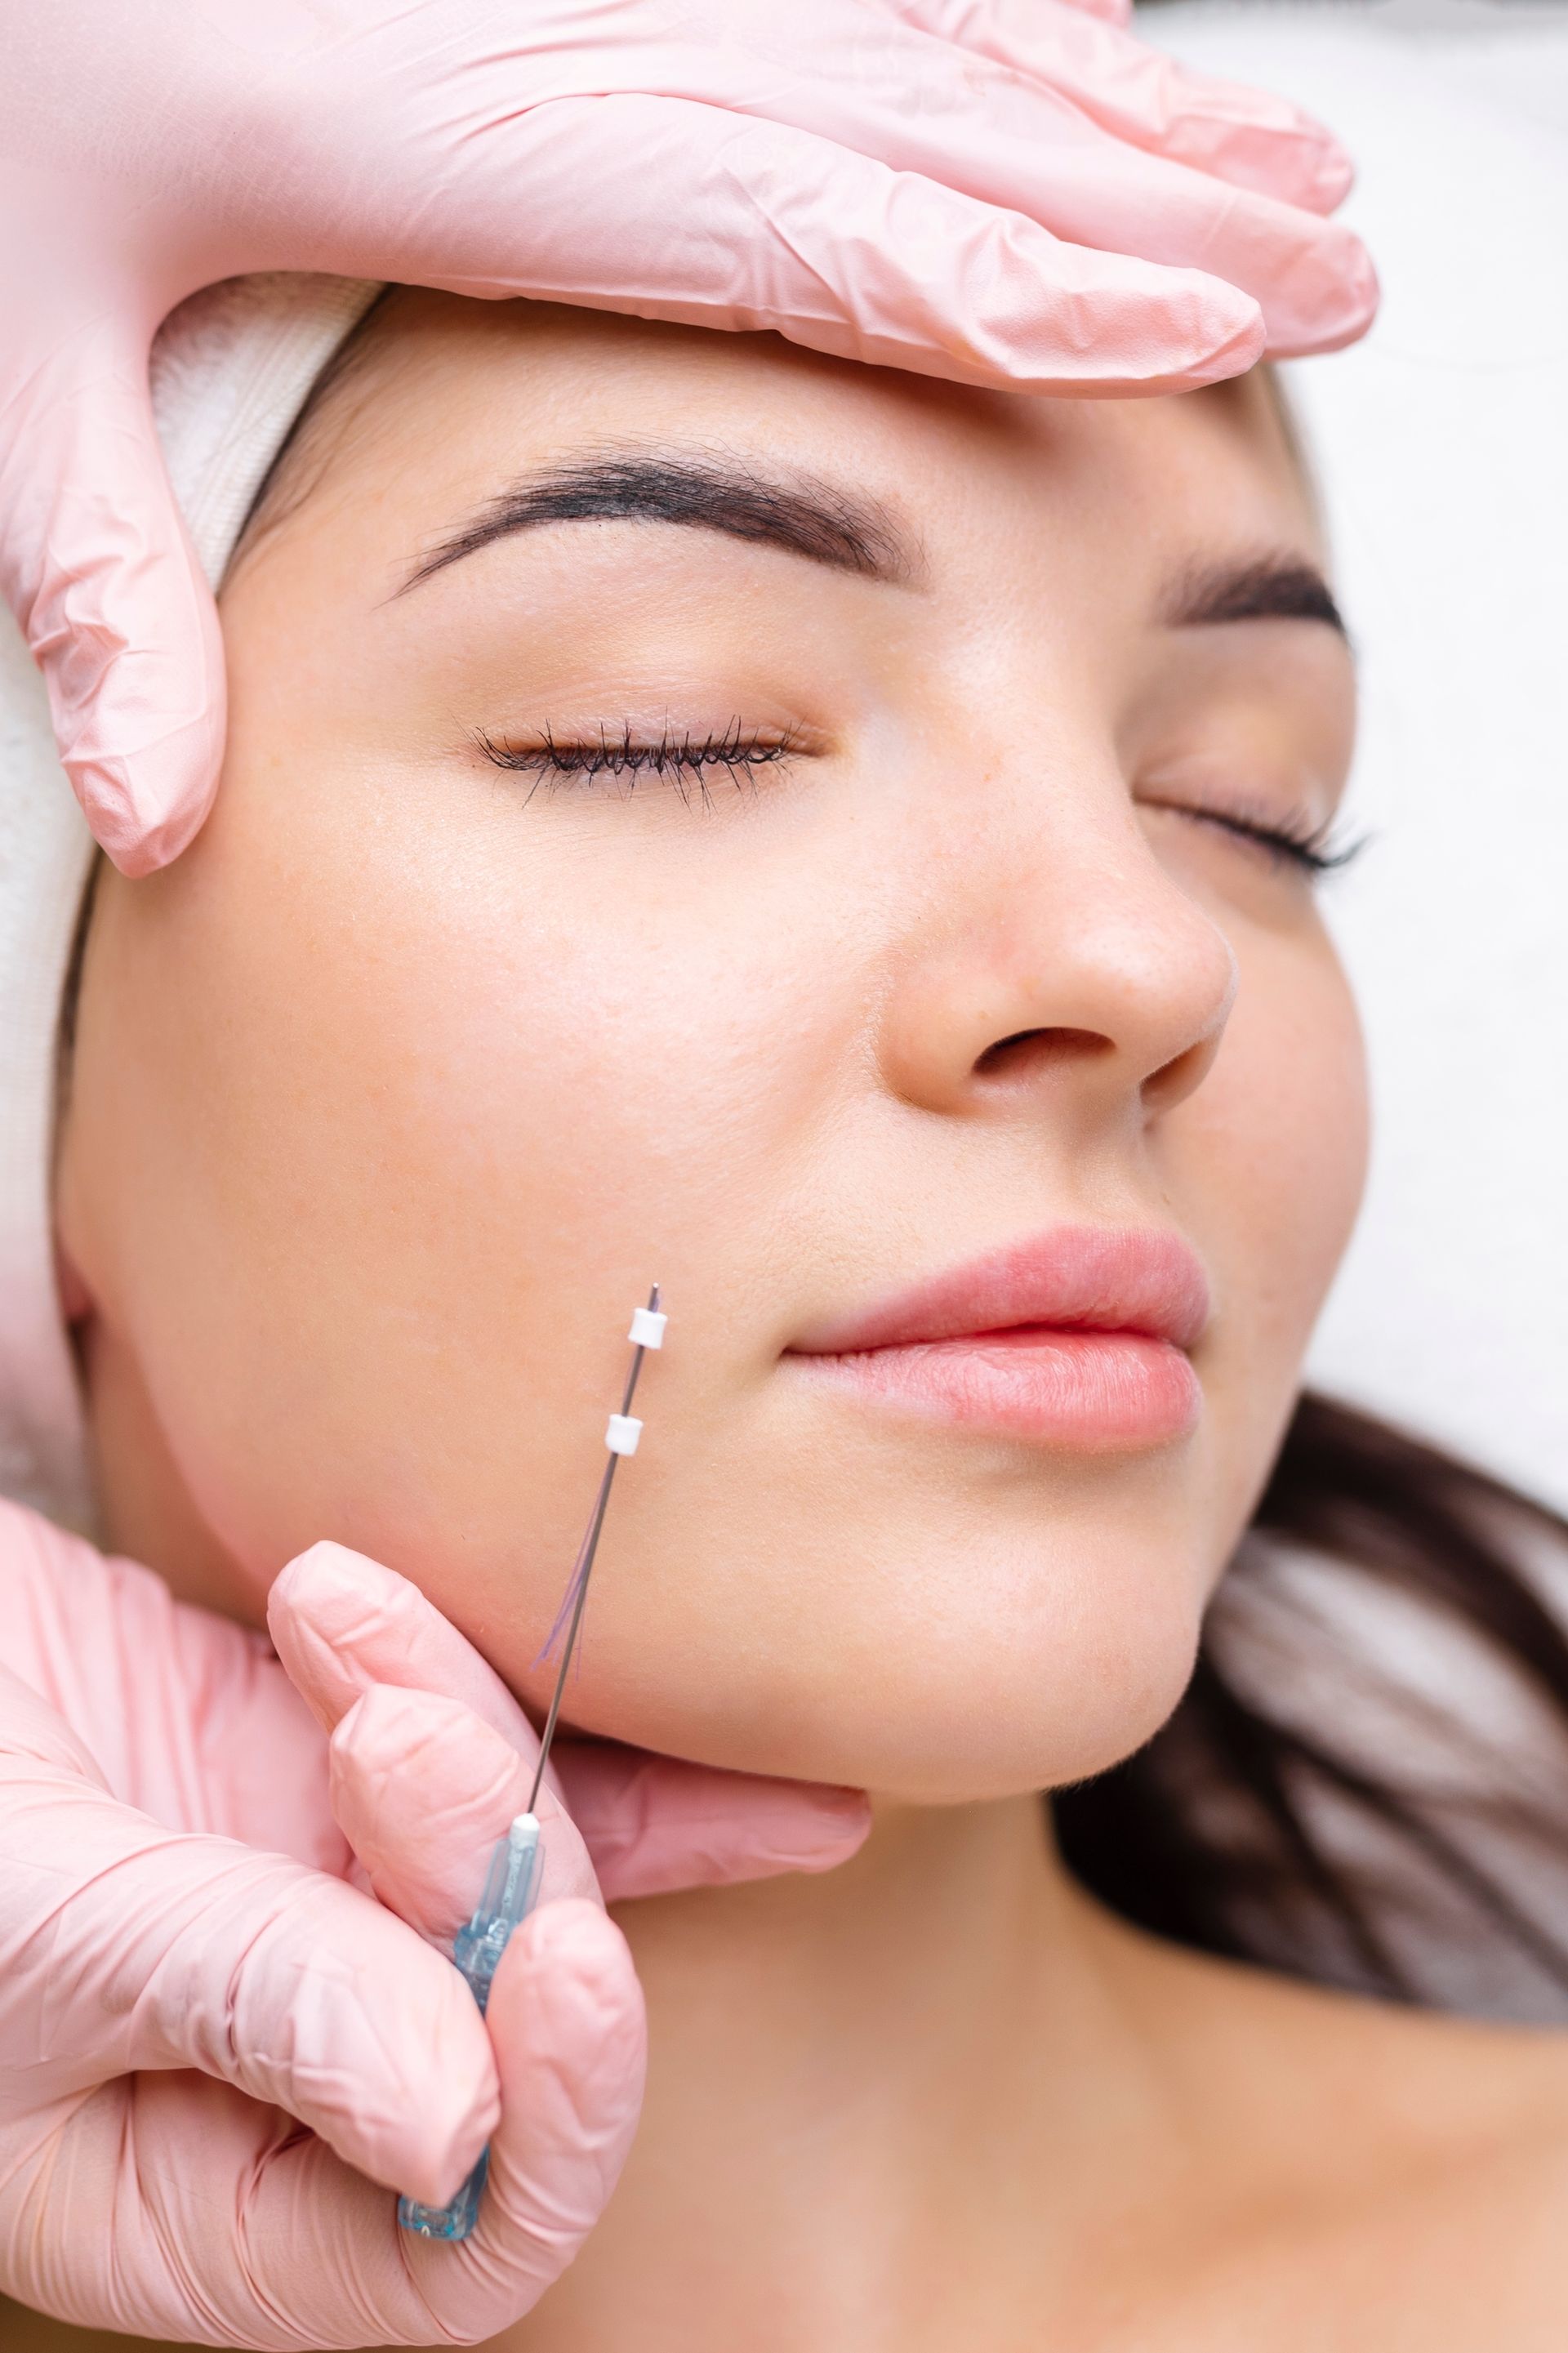 A woman is getting a botox injection in her face.